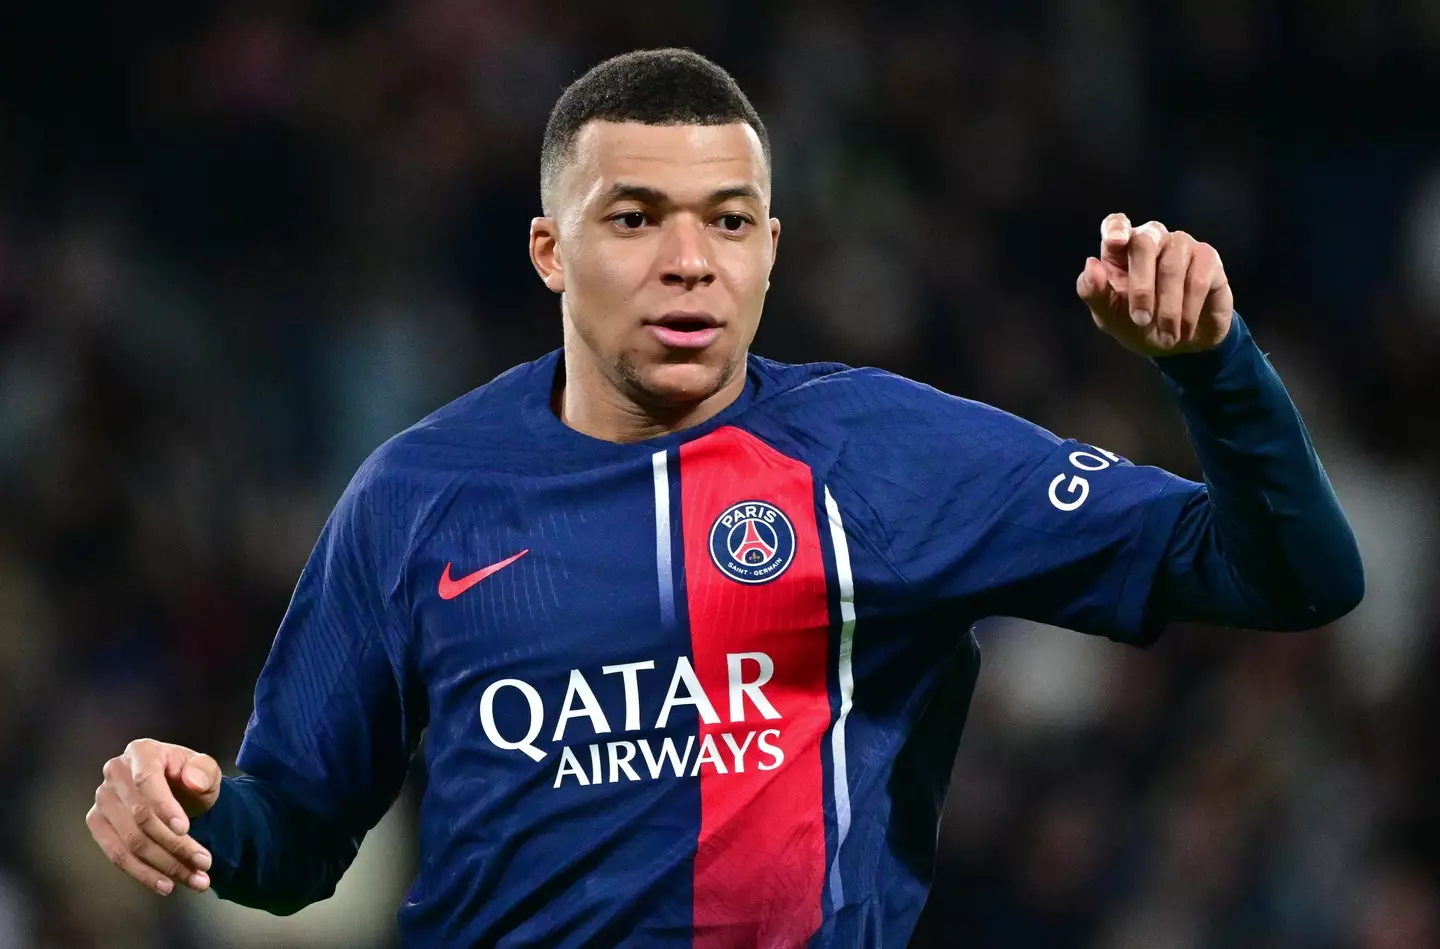 Mbappe is likely to leave Paris Saint-Germain this summer. (Image